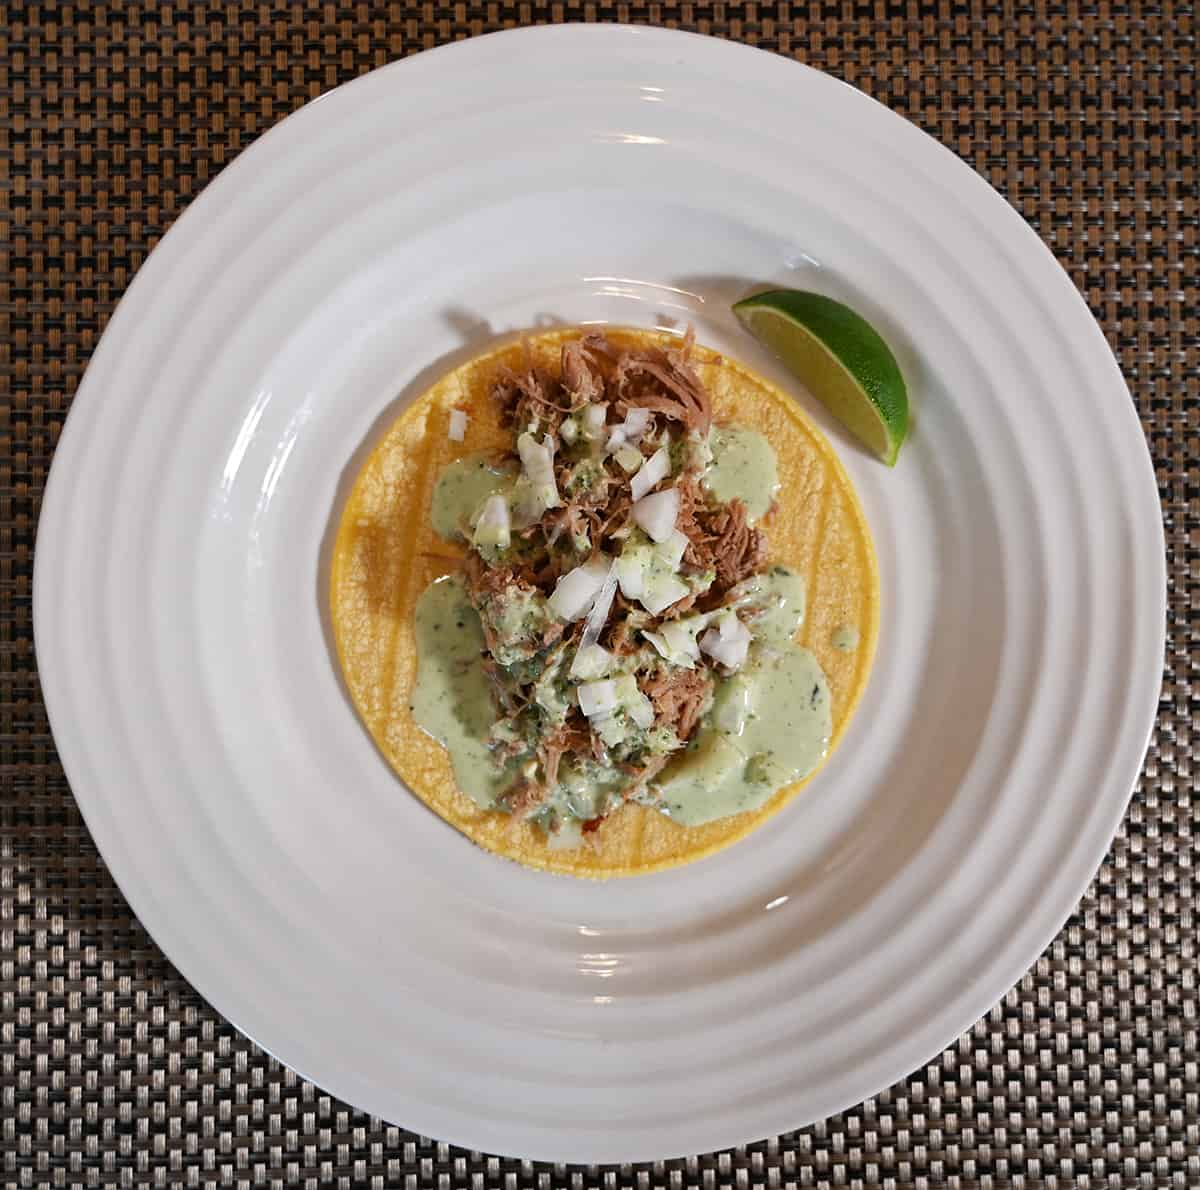 Top down image of a corn tortilla with pork on it. On the pork there is drizzled crema.